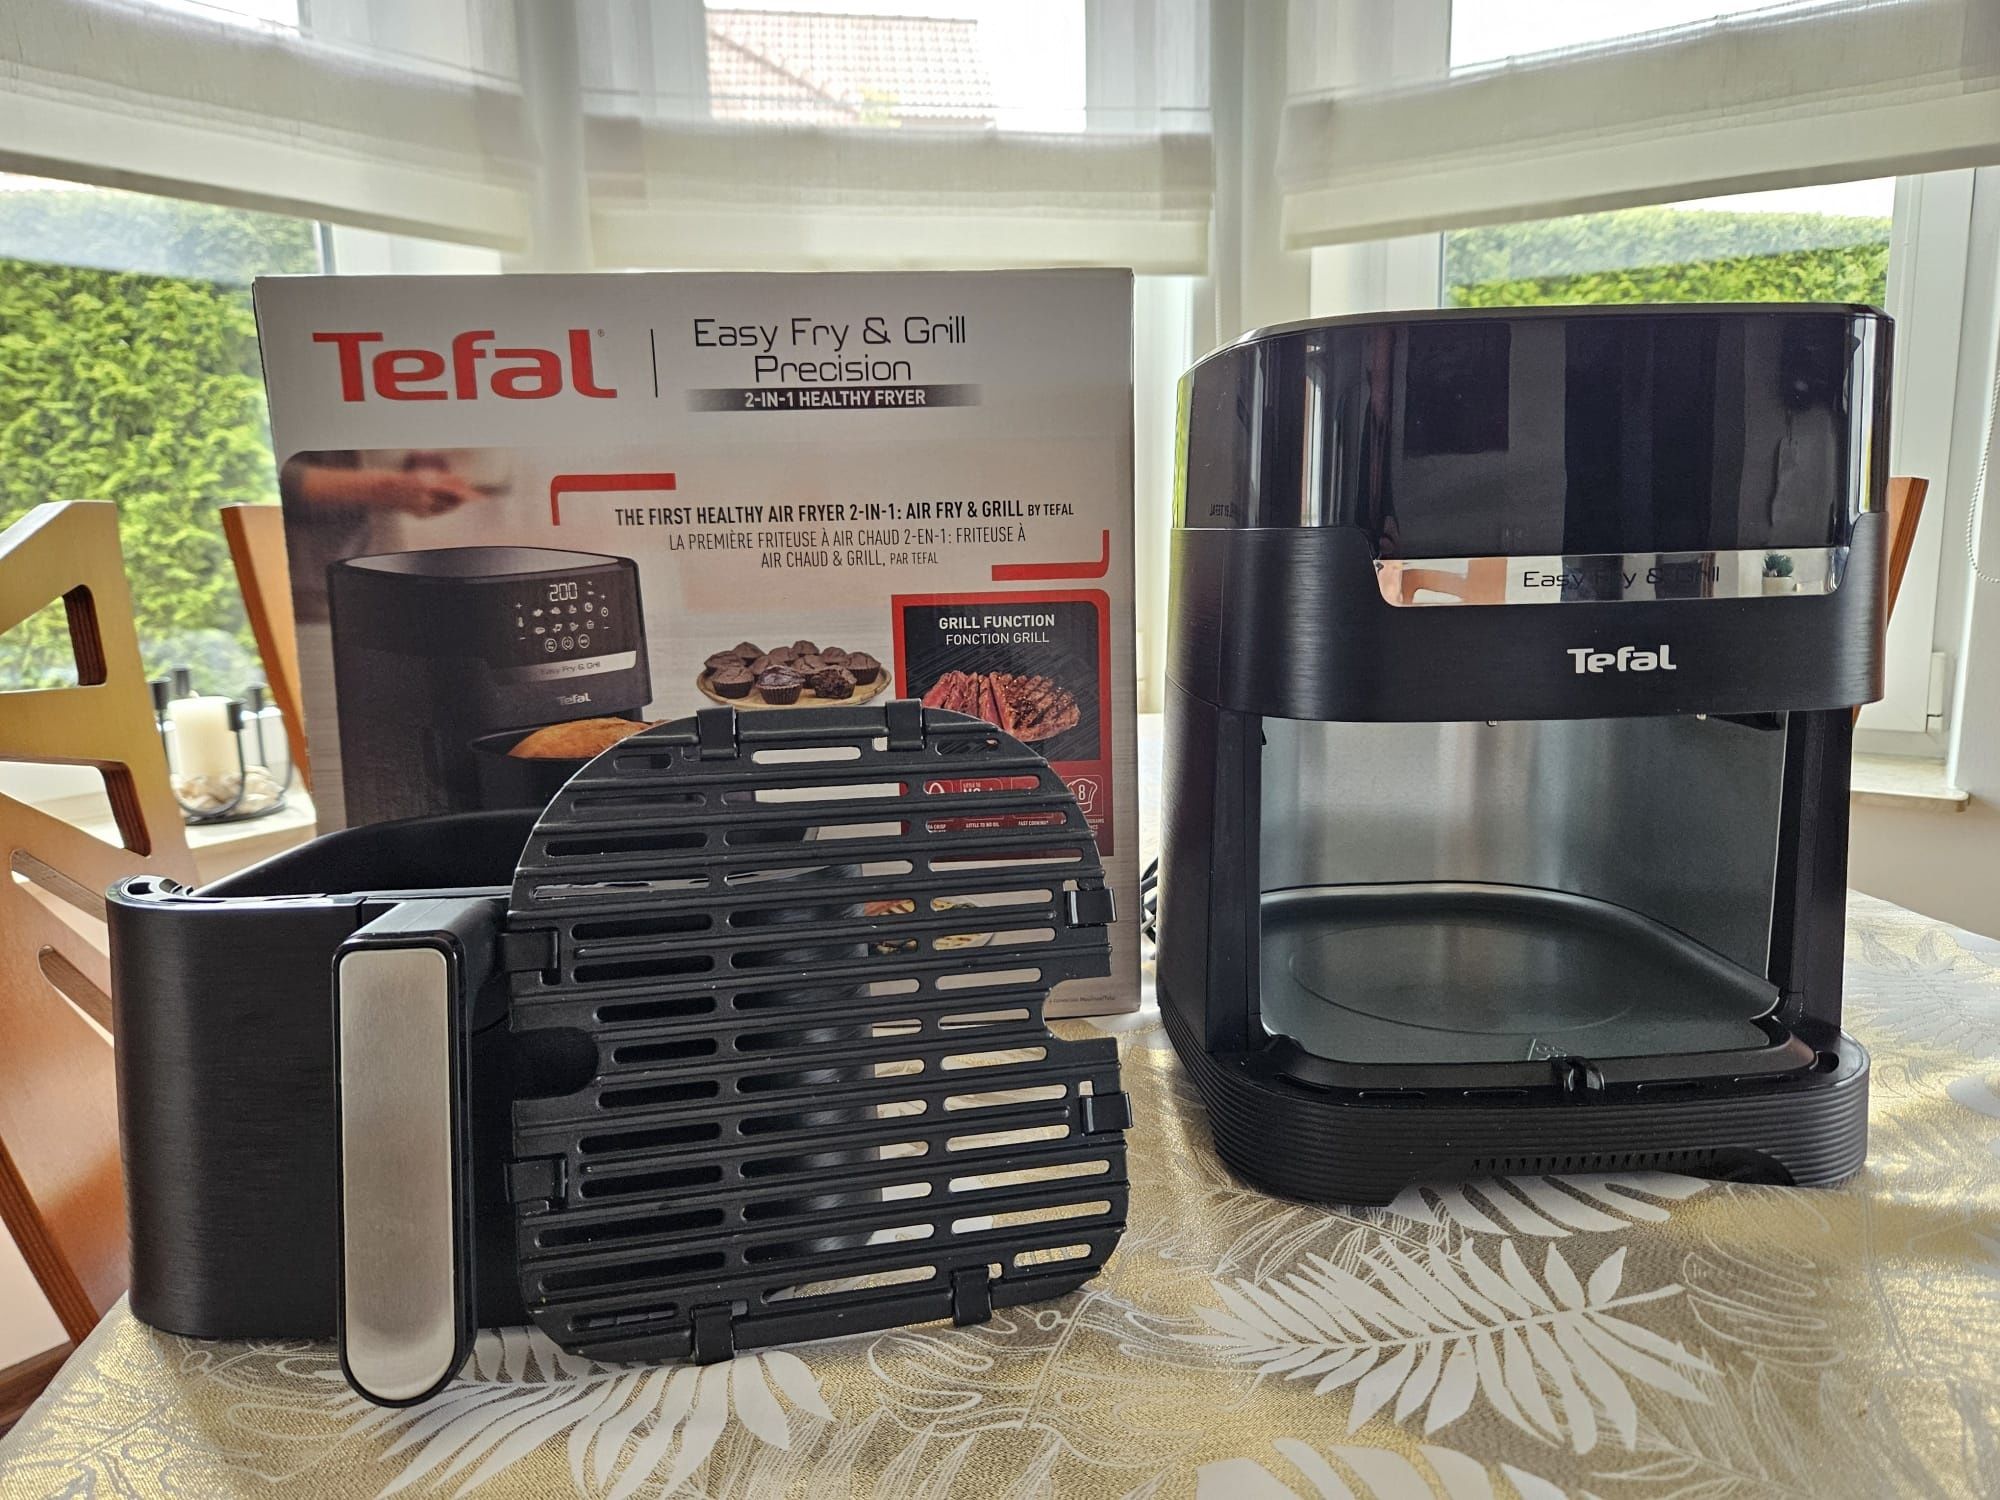 Frytownica Tefal EasyFry&Grill Precision